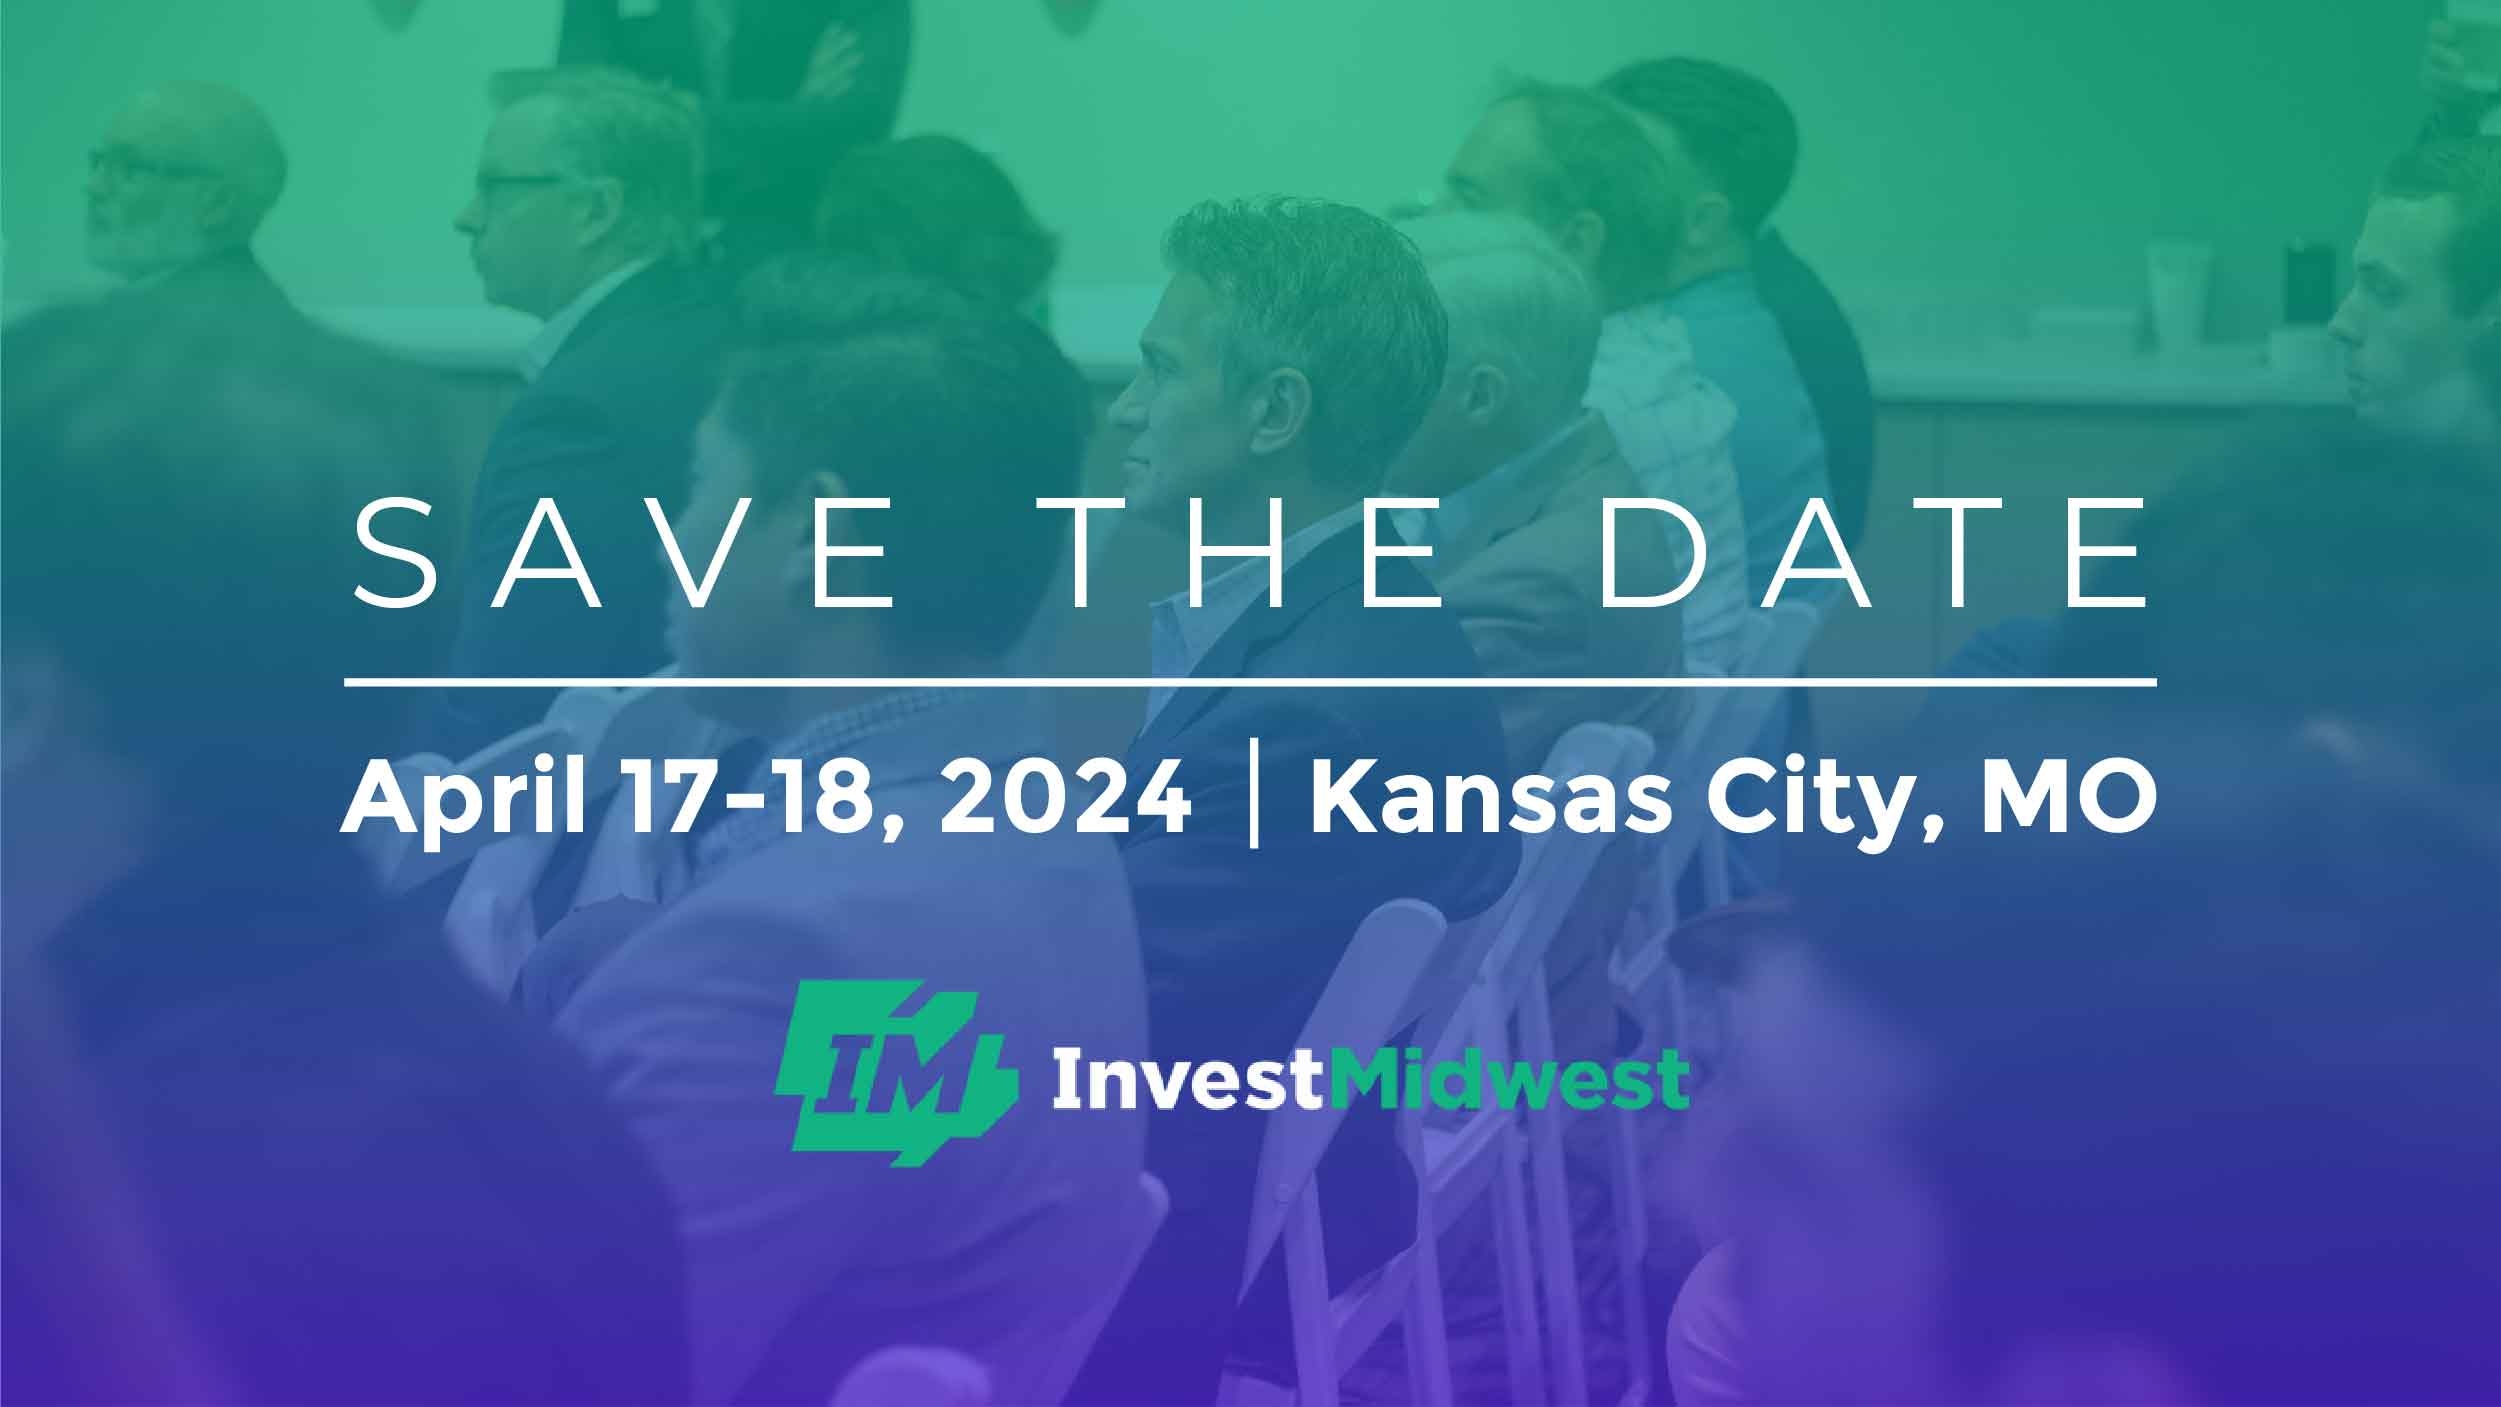 Invest Midwest April 17-18, 2023